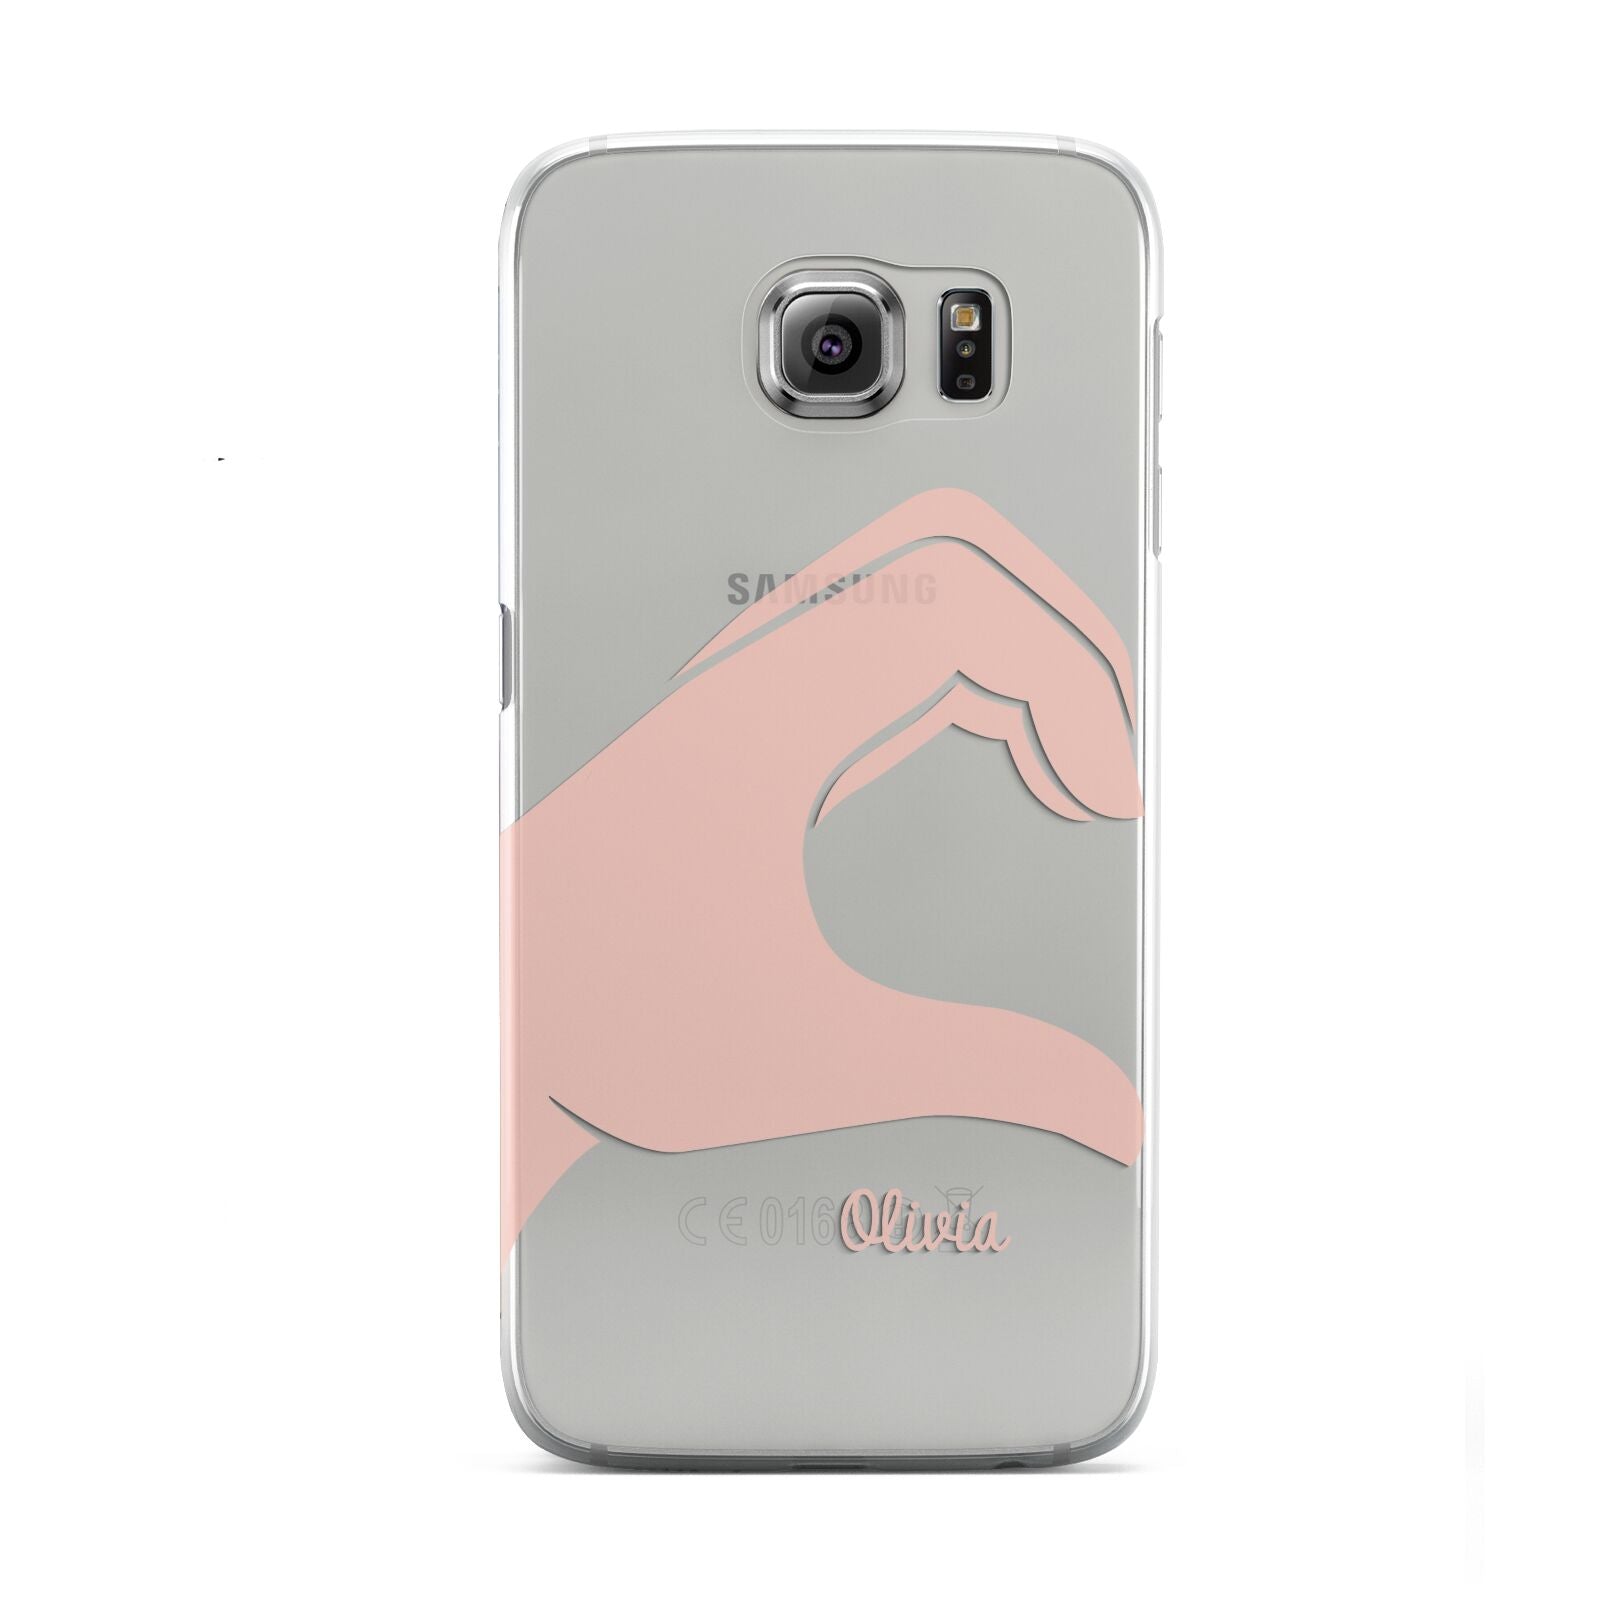 Left Hand in Half Heart with Name Samsung Galaxy S6 Case